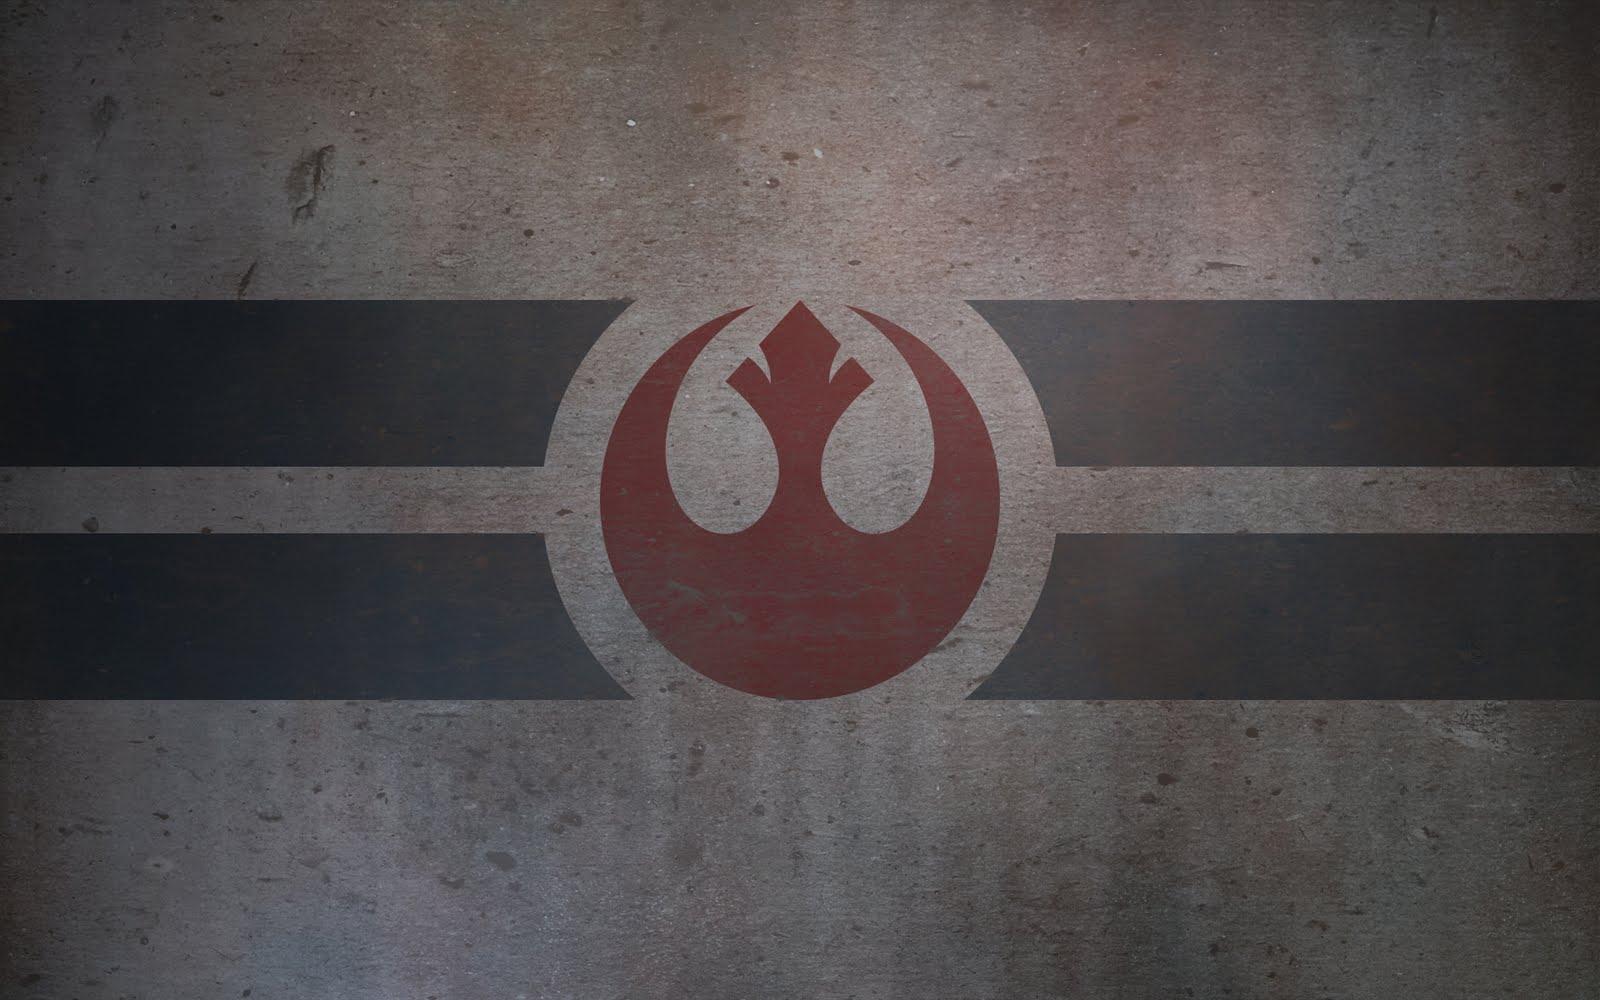 Resistance Star Wars iPhone Wallpapers – Phone wallpapers